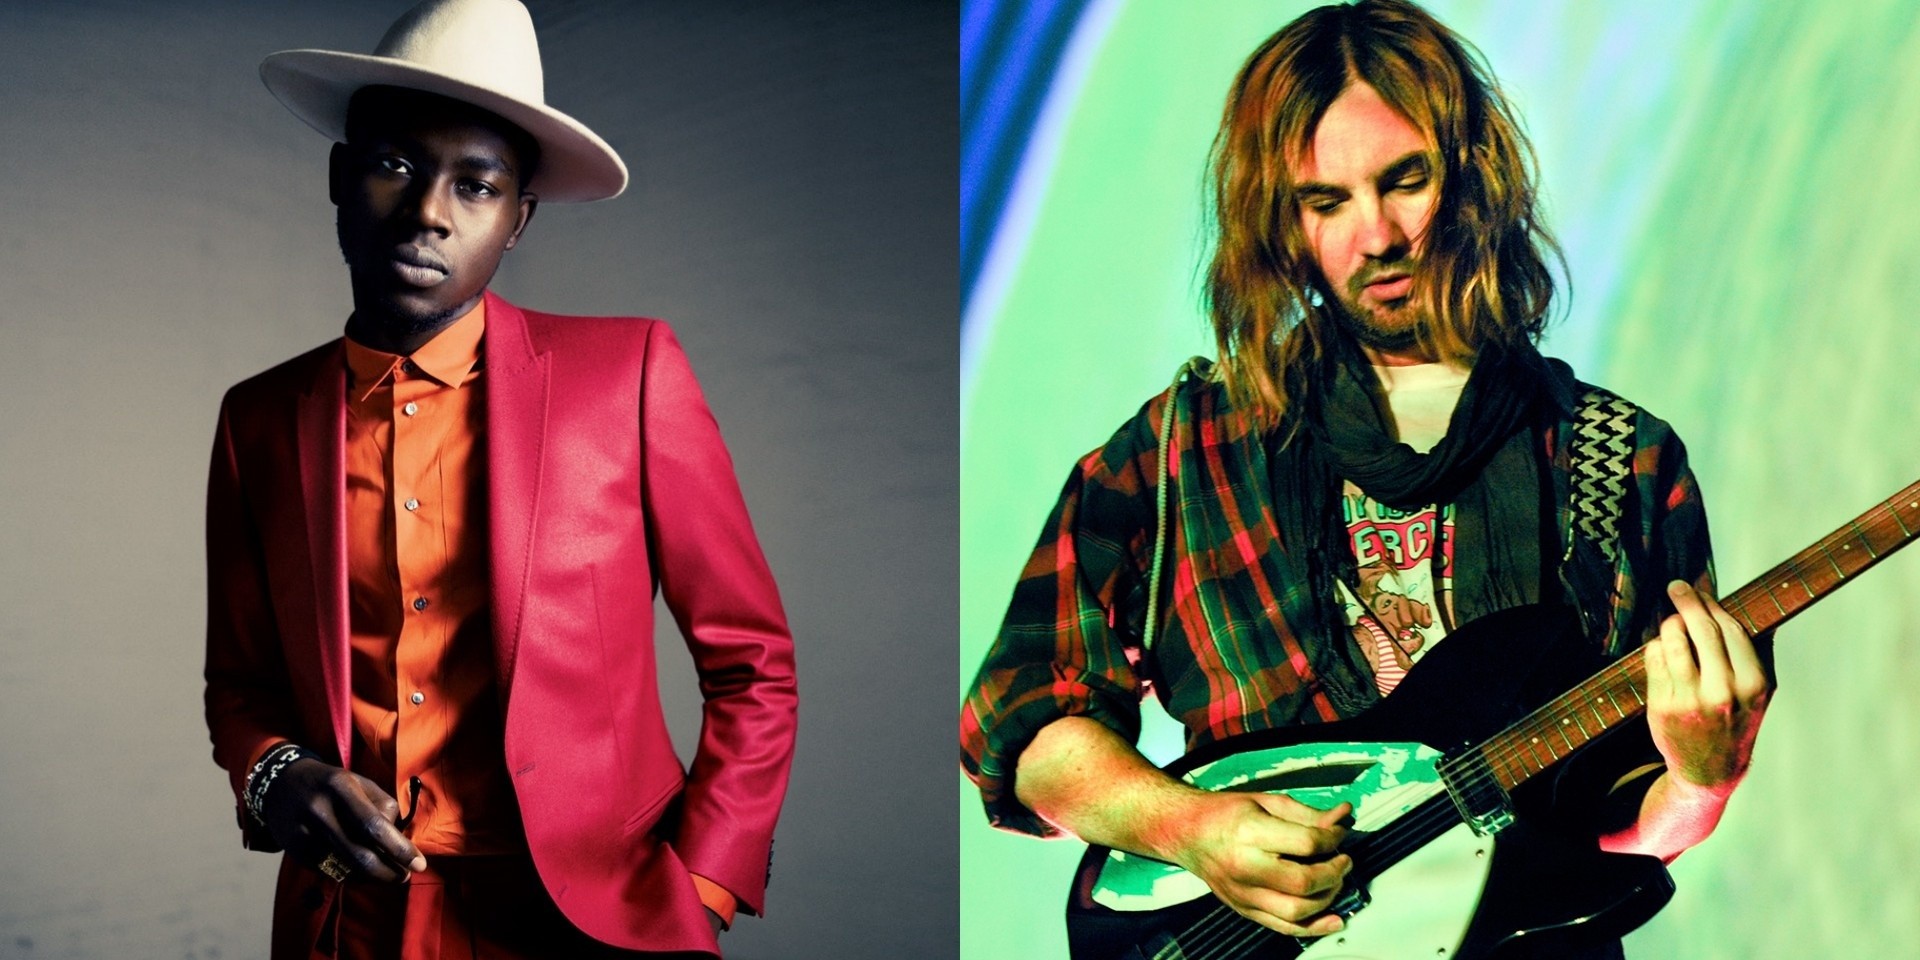 Theophilus London and Tame Impala will release new music tomorrow